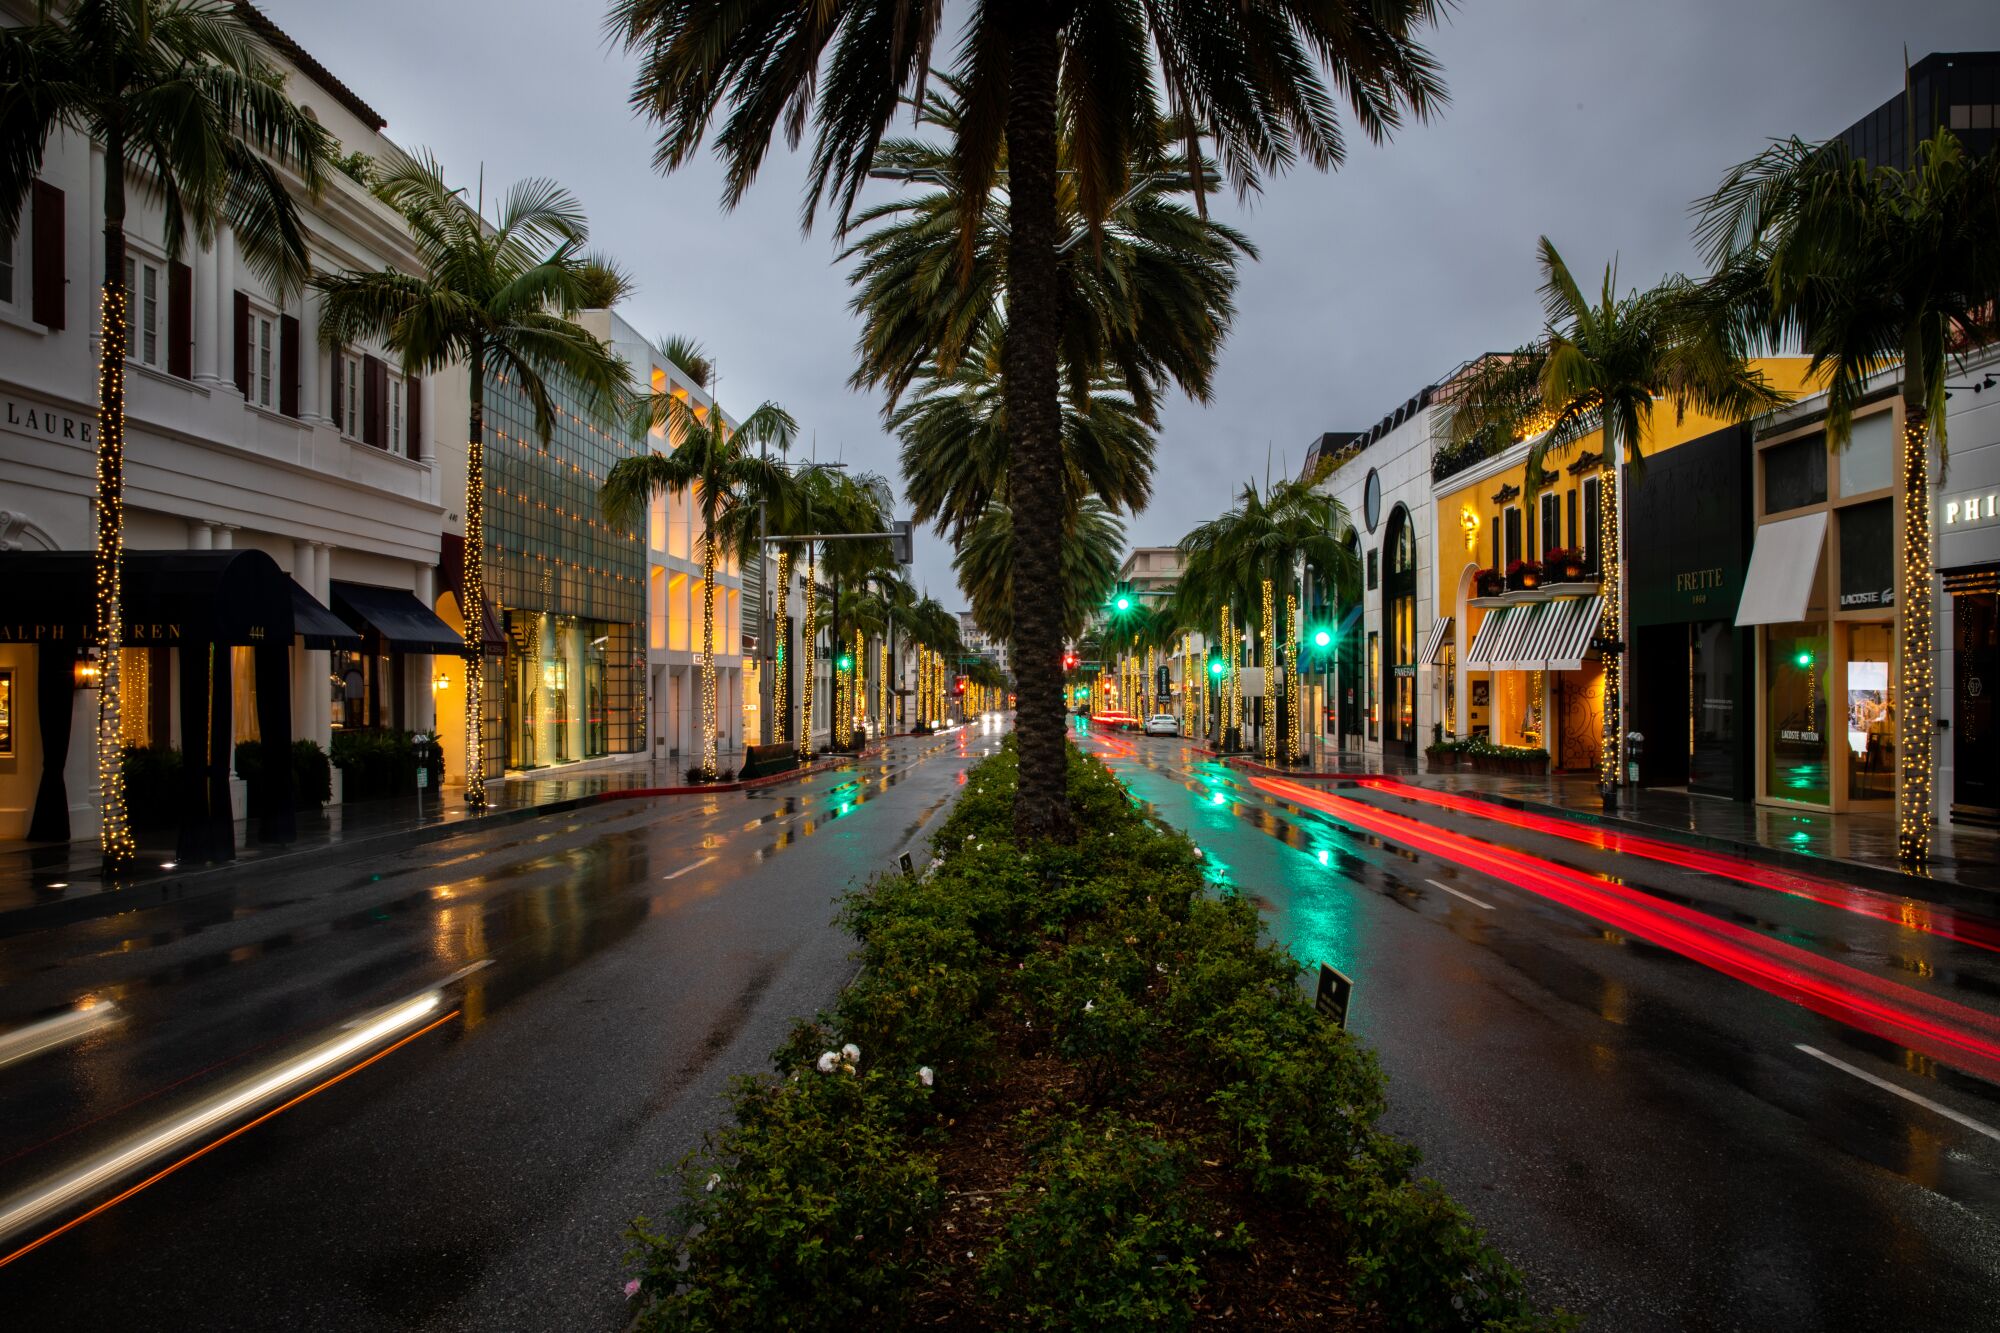 Time exposure along the famed Rodeo Drive in the heart of Beverly Hills